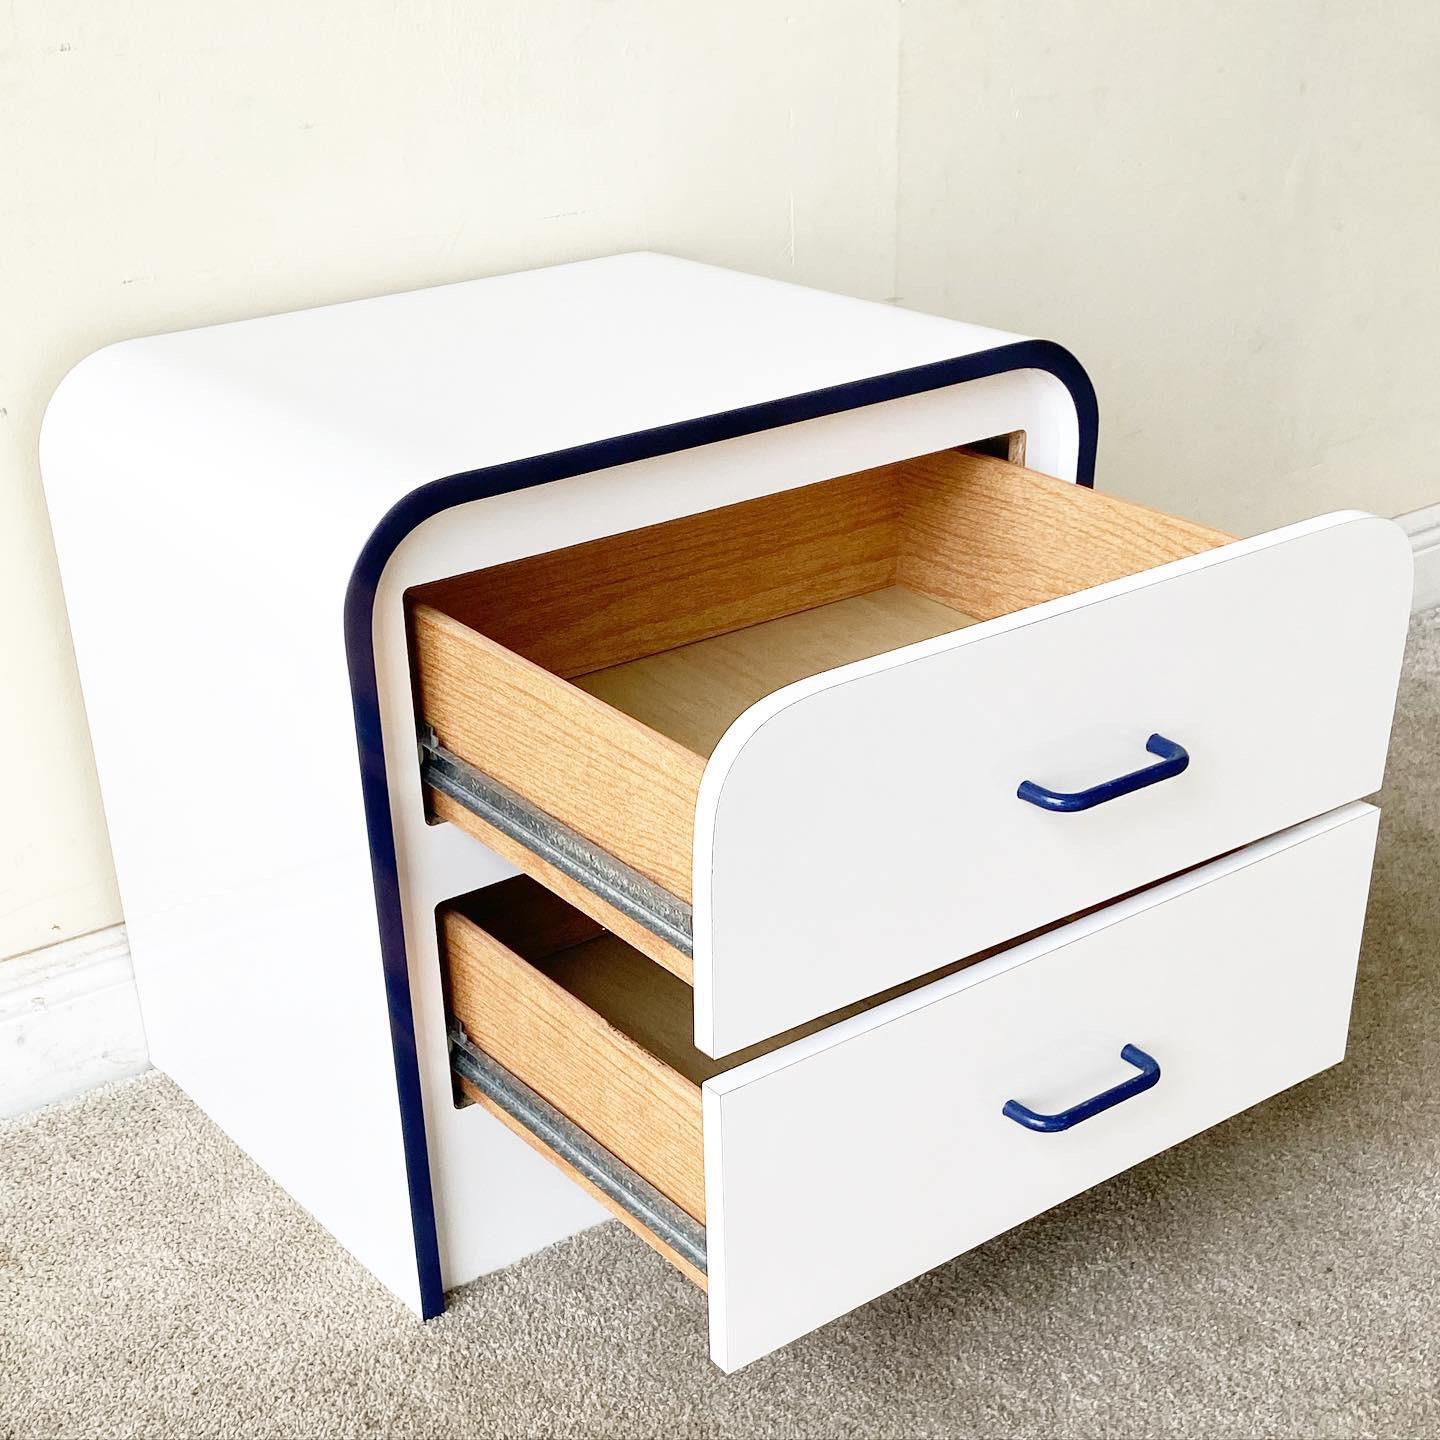 Exceptional postmodern white and blue lacquer laminate waterfall nightstand. Features two spacious drawers with blue drawer pulls.
 